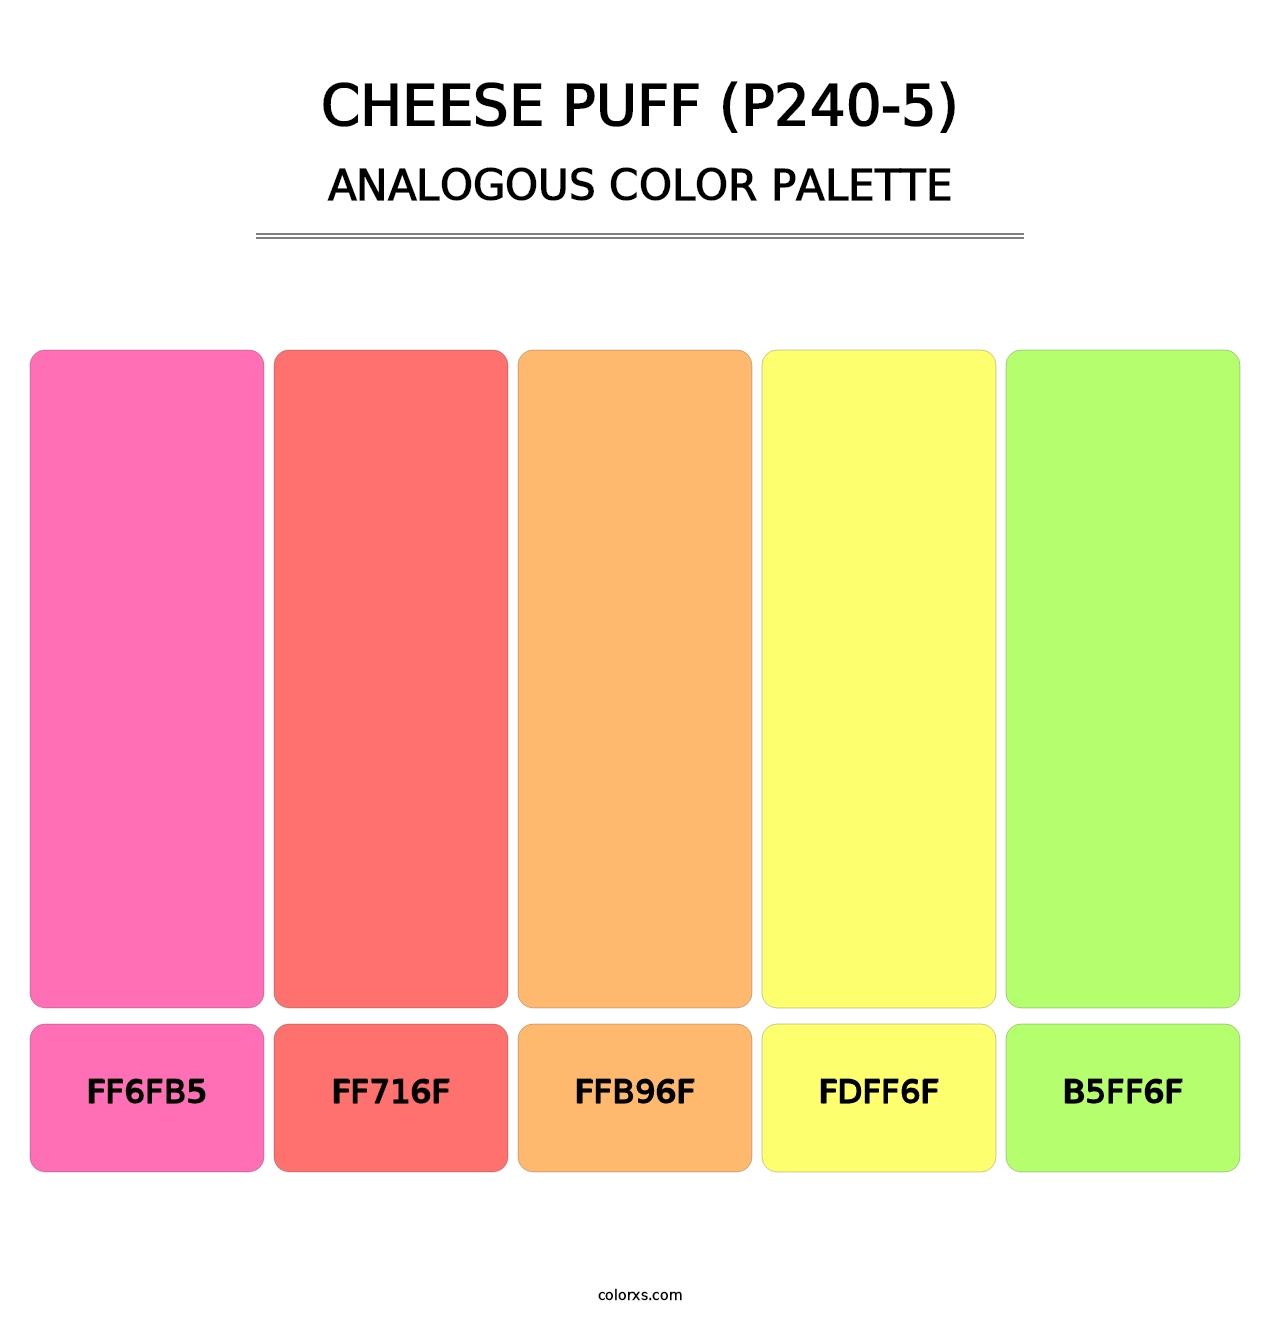 Cheese Puff (P240-5) - Analogous Color Palette